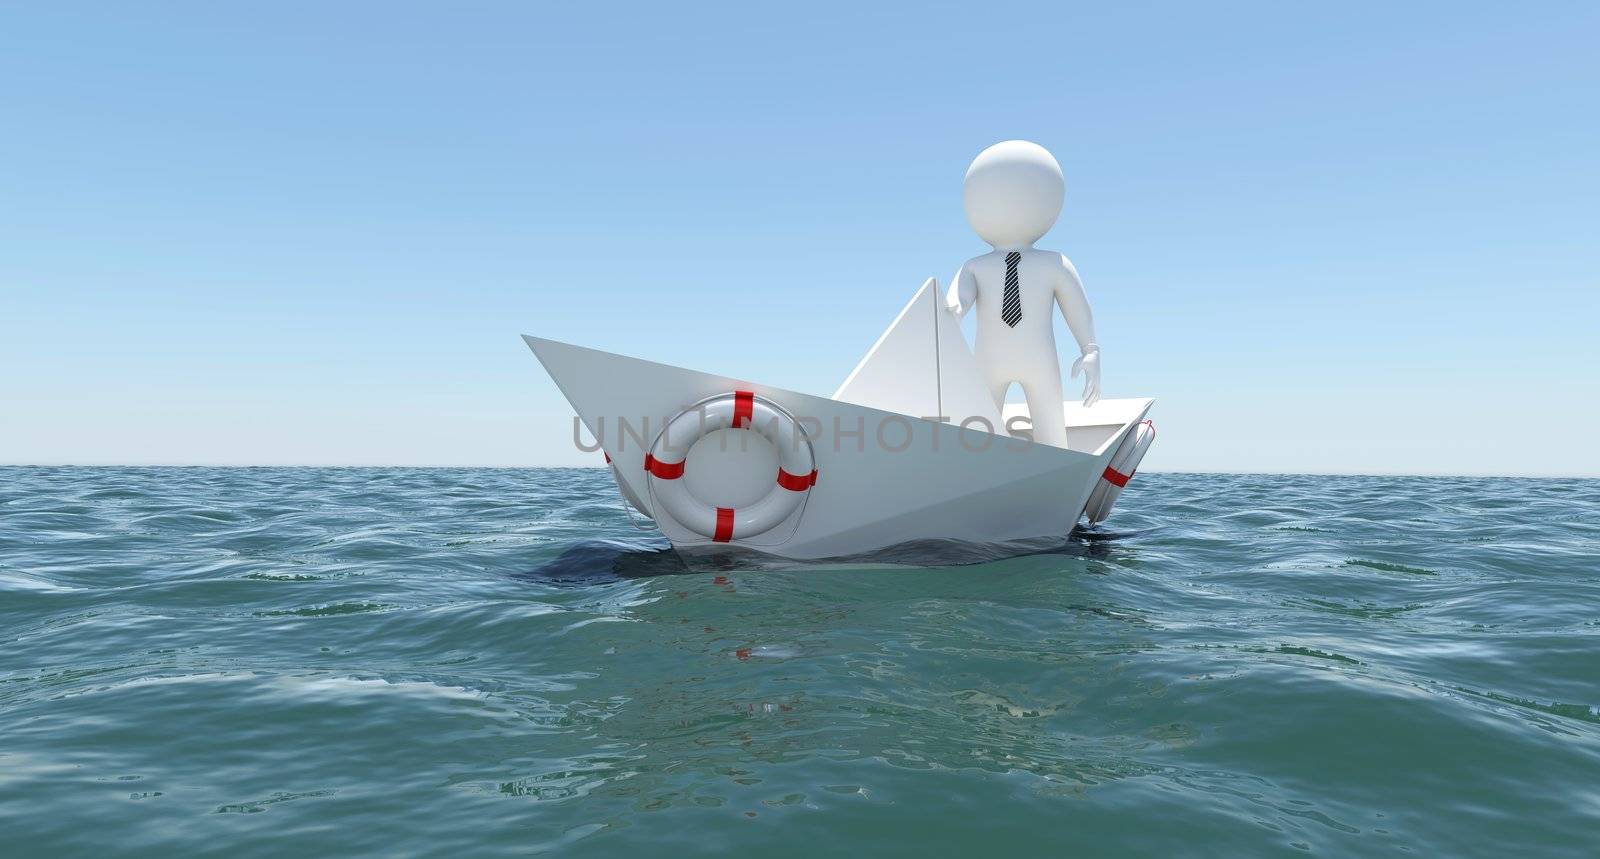 The white man is swimming in the sea on a white paper boat. The blue sky background